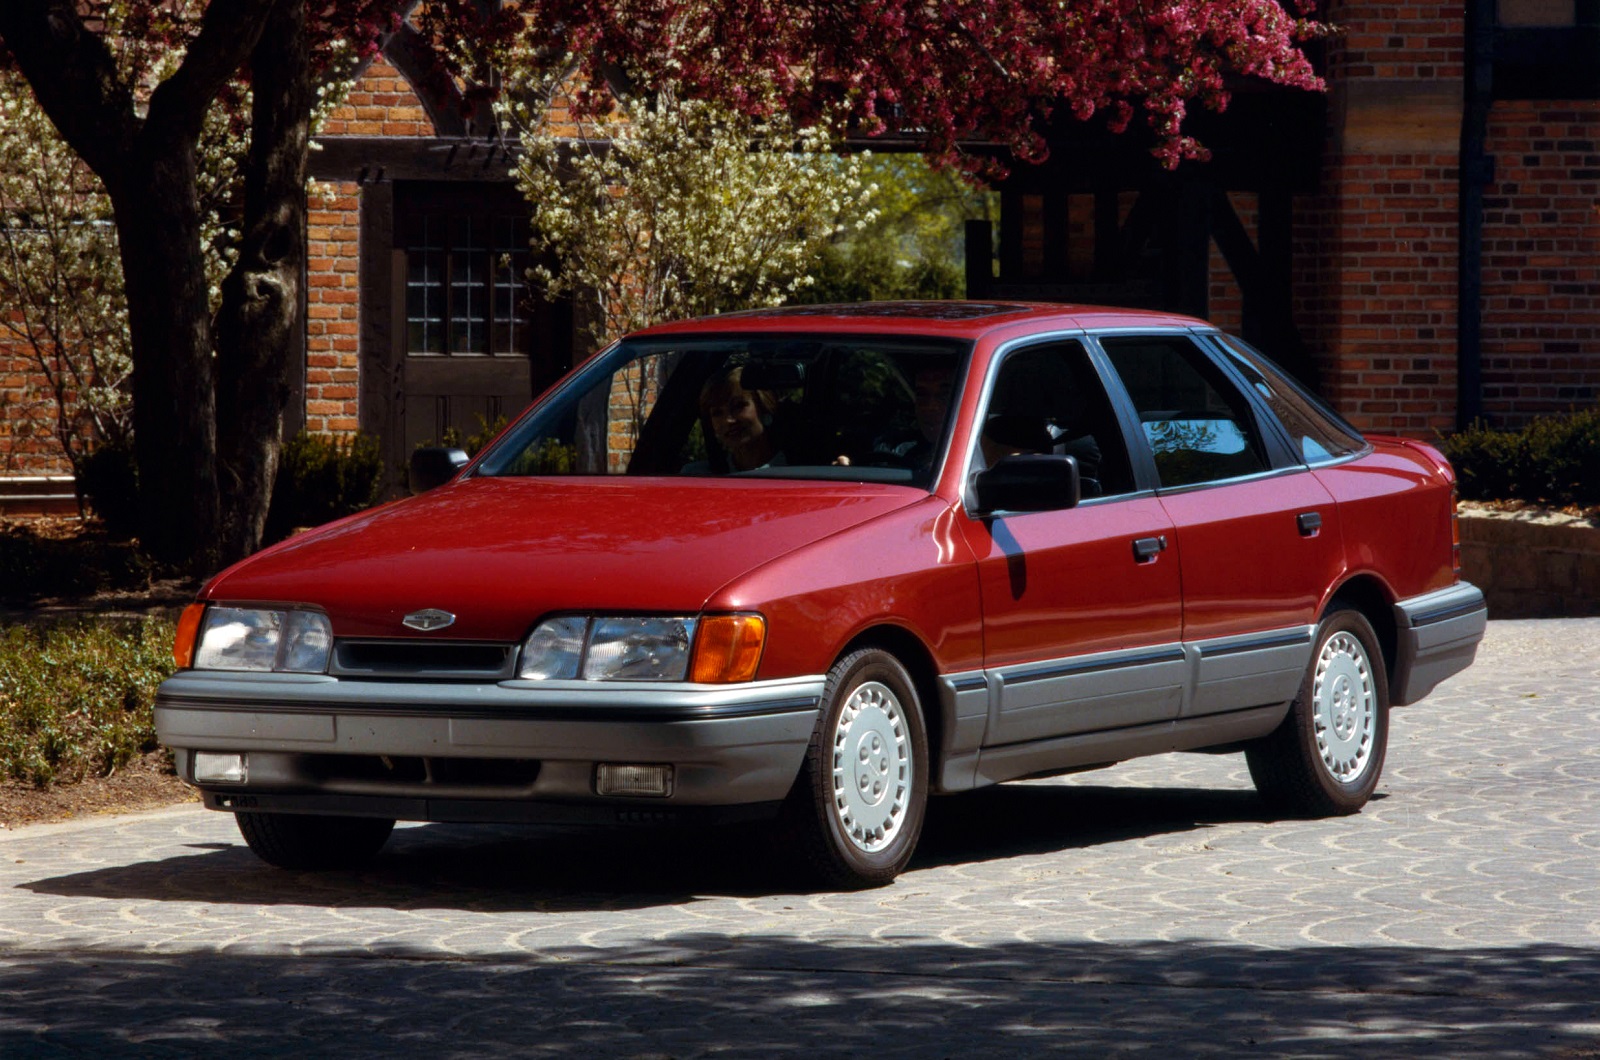 <p>Ford took a shot at its European rivals by creating the Merkur brand. Launched for <strong>1985</strong>, the line-up initially consisted only of the two-door <strong>XRT4i</strong>, which was built in Germany and closely related to the Sierra XR4Ti sold in Europe. <strong>1988</strong> brought the <strong>Scorpio</strong>, a four-door saloon wearing a nameplate Europeans were familiar with. Merkur sales peaked at <strong>15,261 units</strong> in 1988 but dropped to <strong>8,765</strong> the following year and <strong>2,622</strong> in 1990. Short-lived, the Merkur brand was axed after 1990.</p><p>It was an experiment that Ford never tried again.</p>